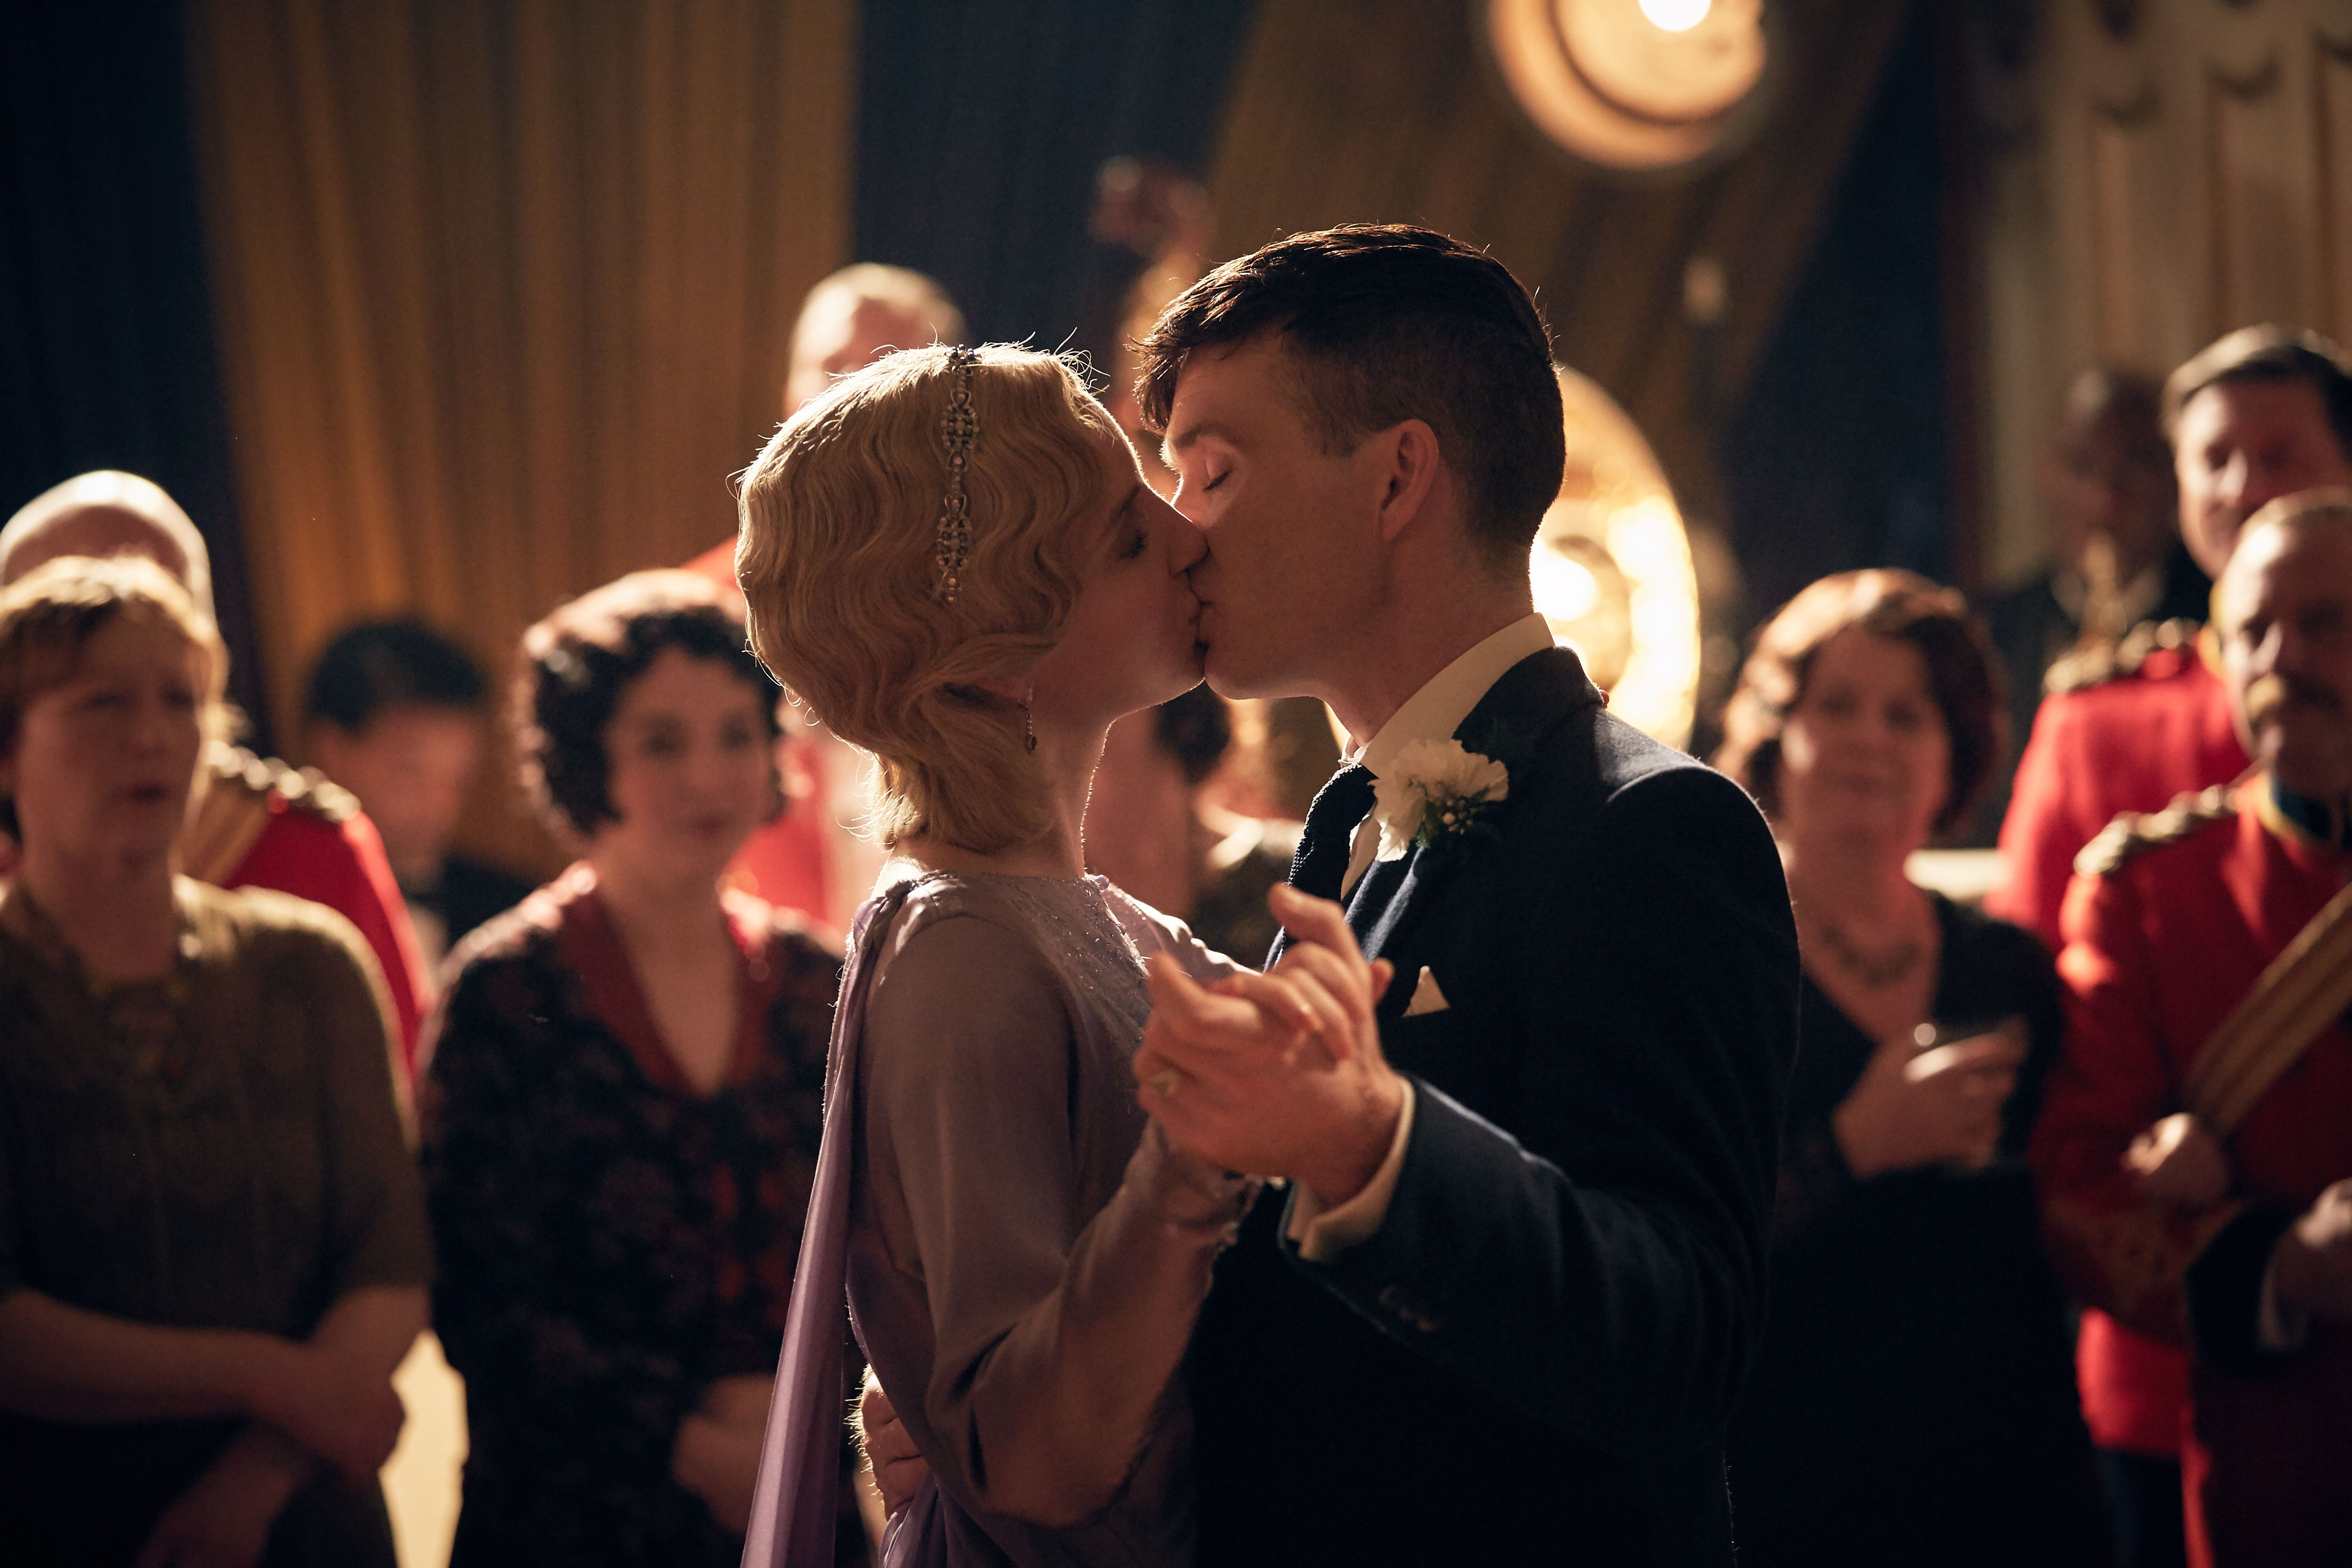 Peaky Blinders' Season 3's Early Surprise Death Is the Show's Boldest Move Yet